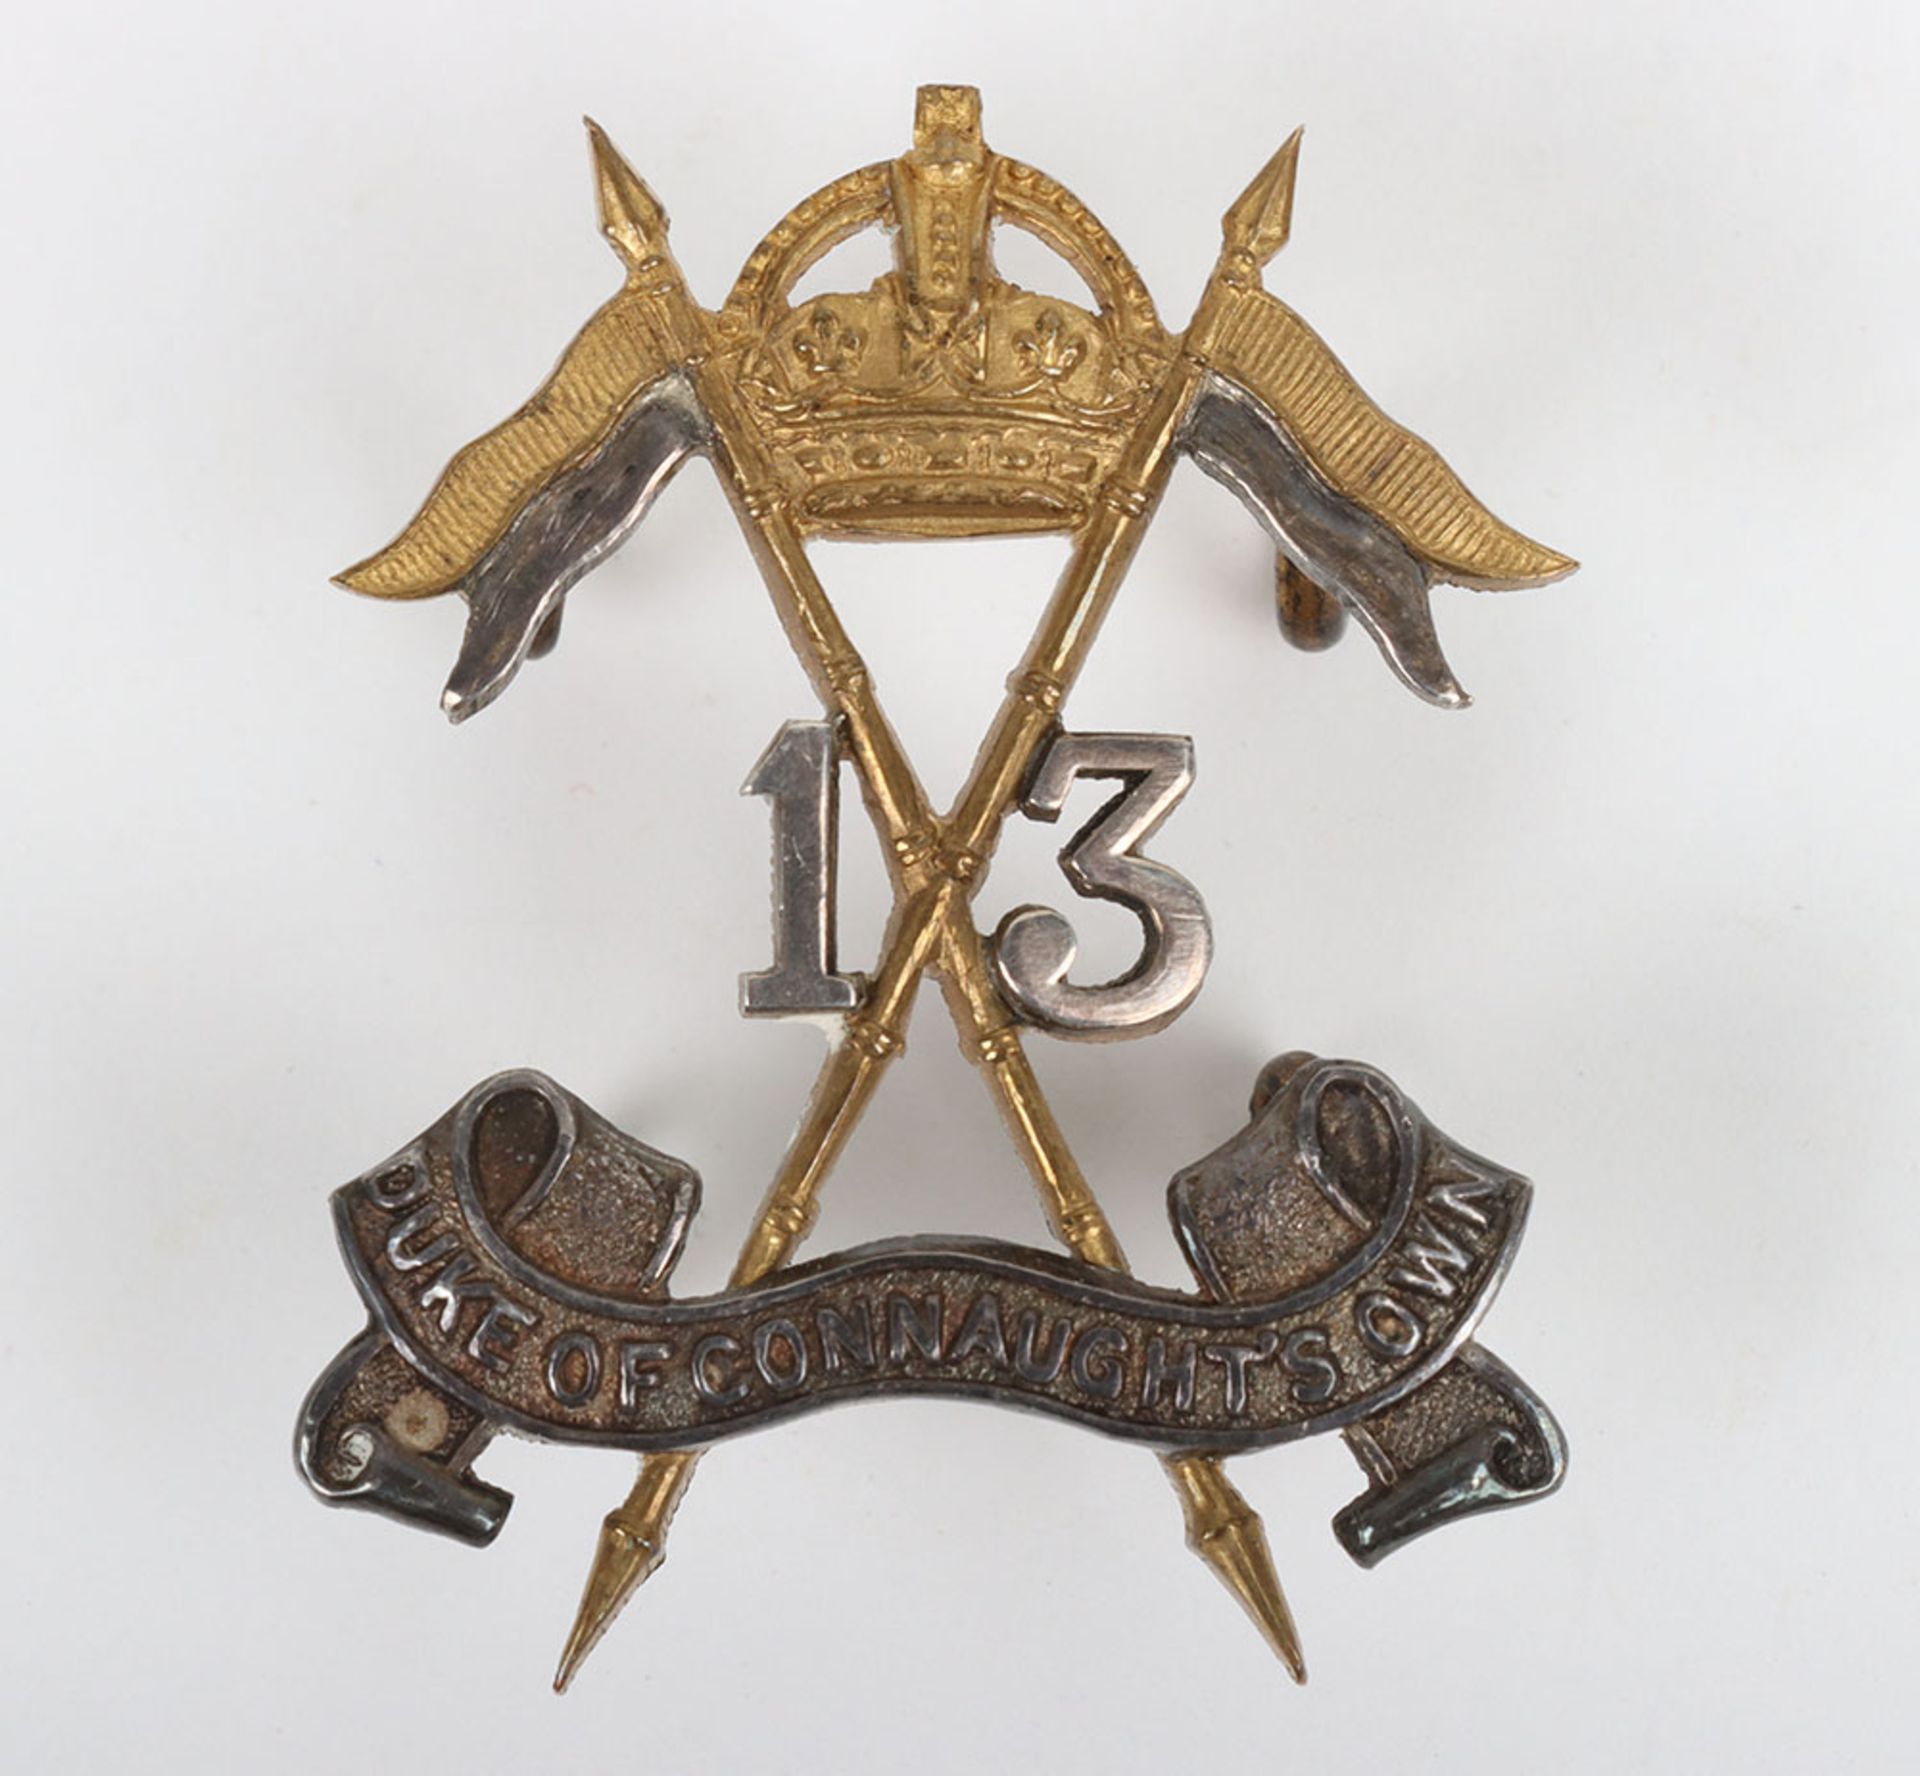 13th Duke of Connaught’s Own Lancers Officers Cap Badge